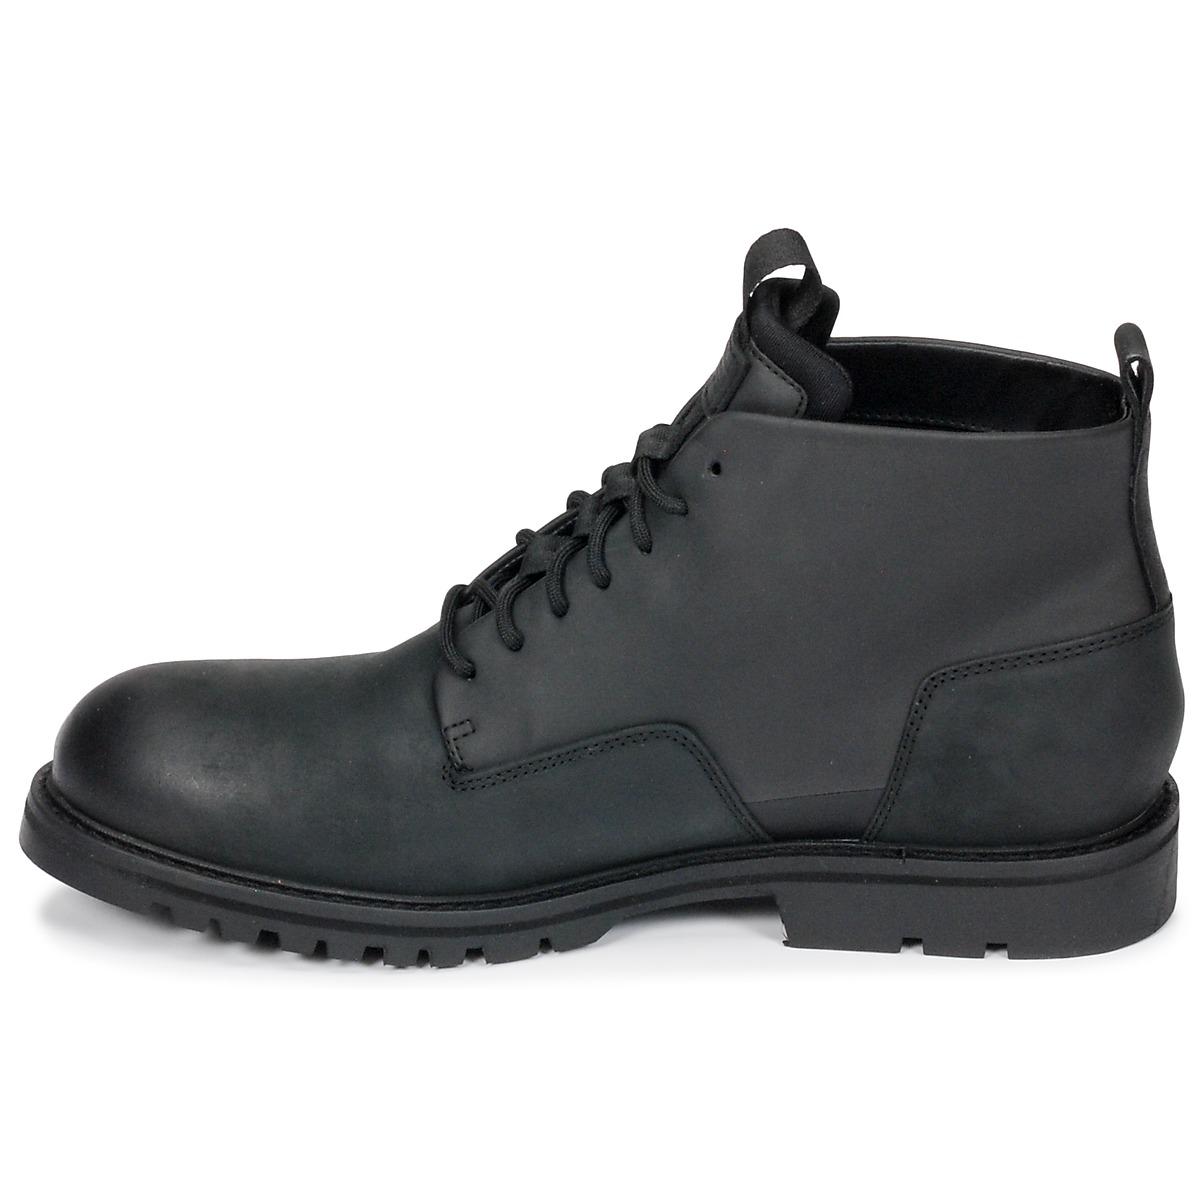 G-Star RAW Leather Core Derby Boot Ii Mid Boots in Black for Men - Lyst